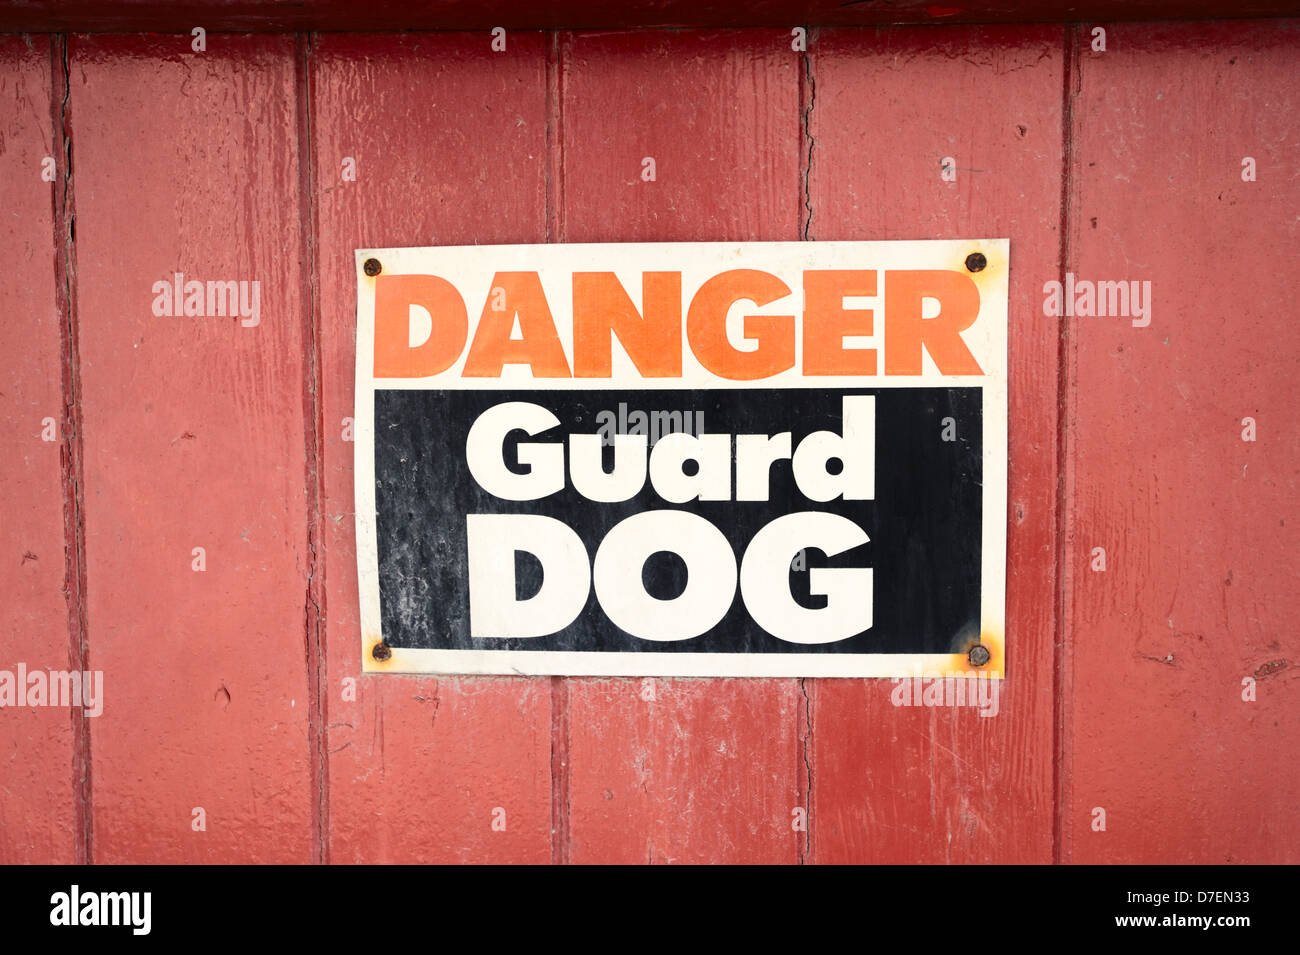 Danger Guard Dog sign on a red painted wooden gate, Wales, UK. Stock Photo